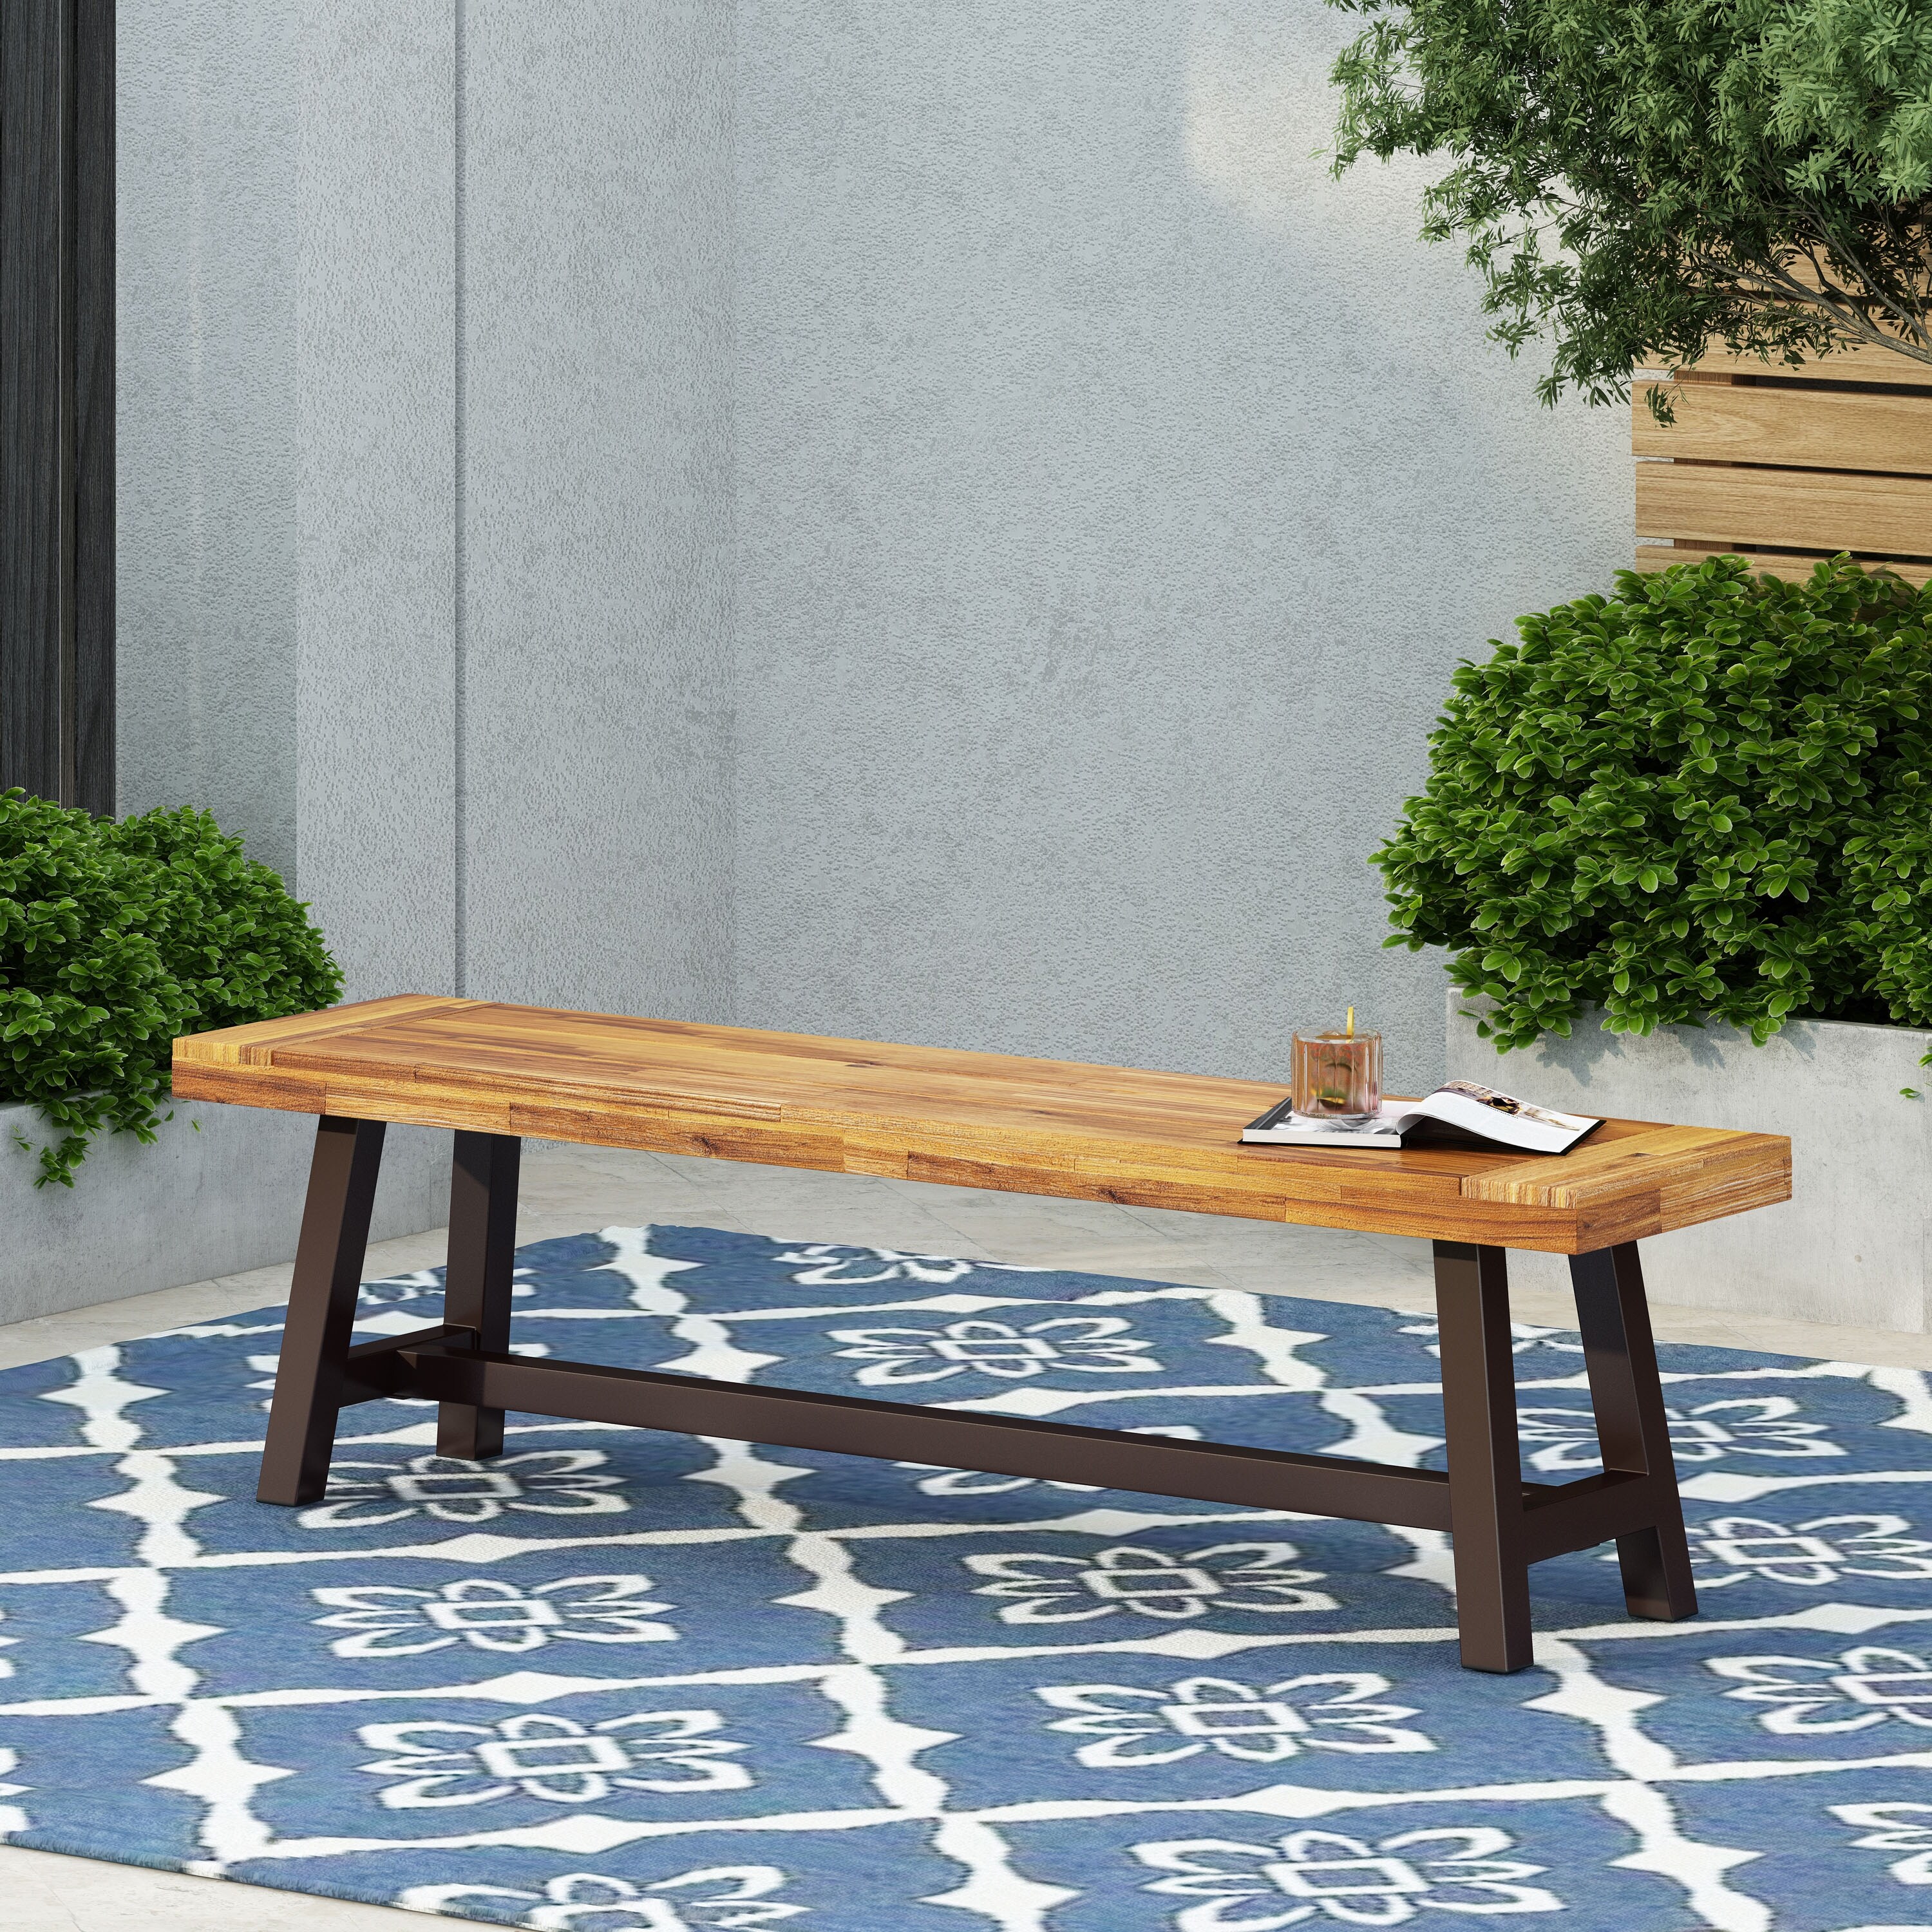 https://ak1.ostkcdn.com/images/products/is/images/direct/328fb5739d63451ca84d36ba40fc27c3fde97a2c/Carlisle-Outdoor-Acacia-Wood-Dining-Bench-by-Christopher-Knight-Home.jpg